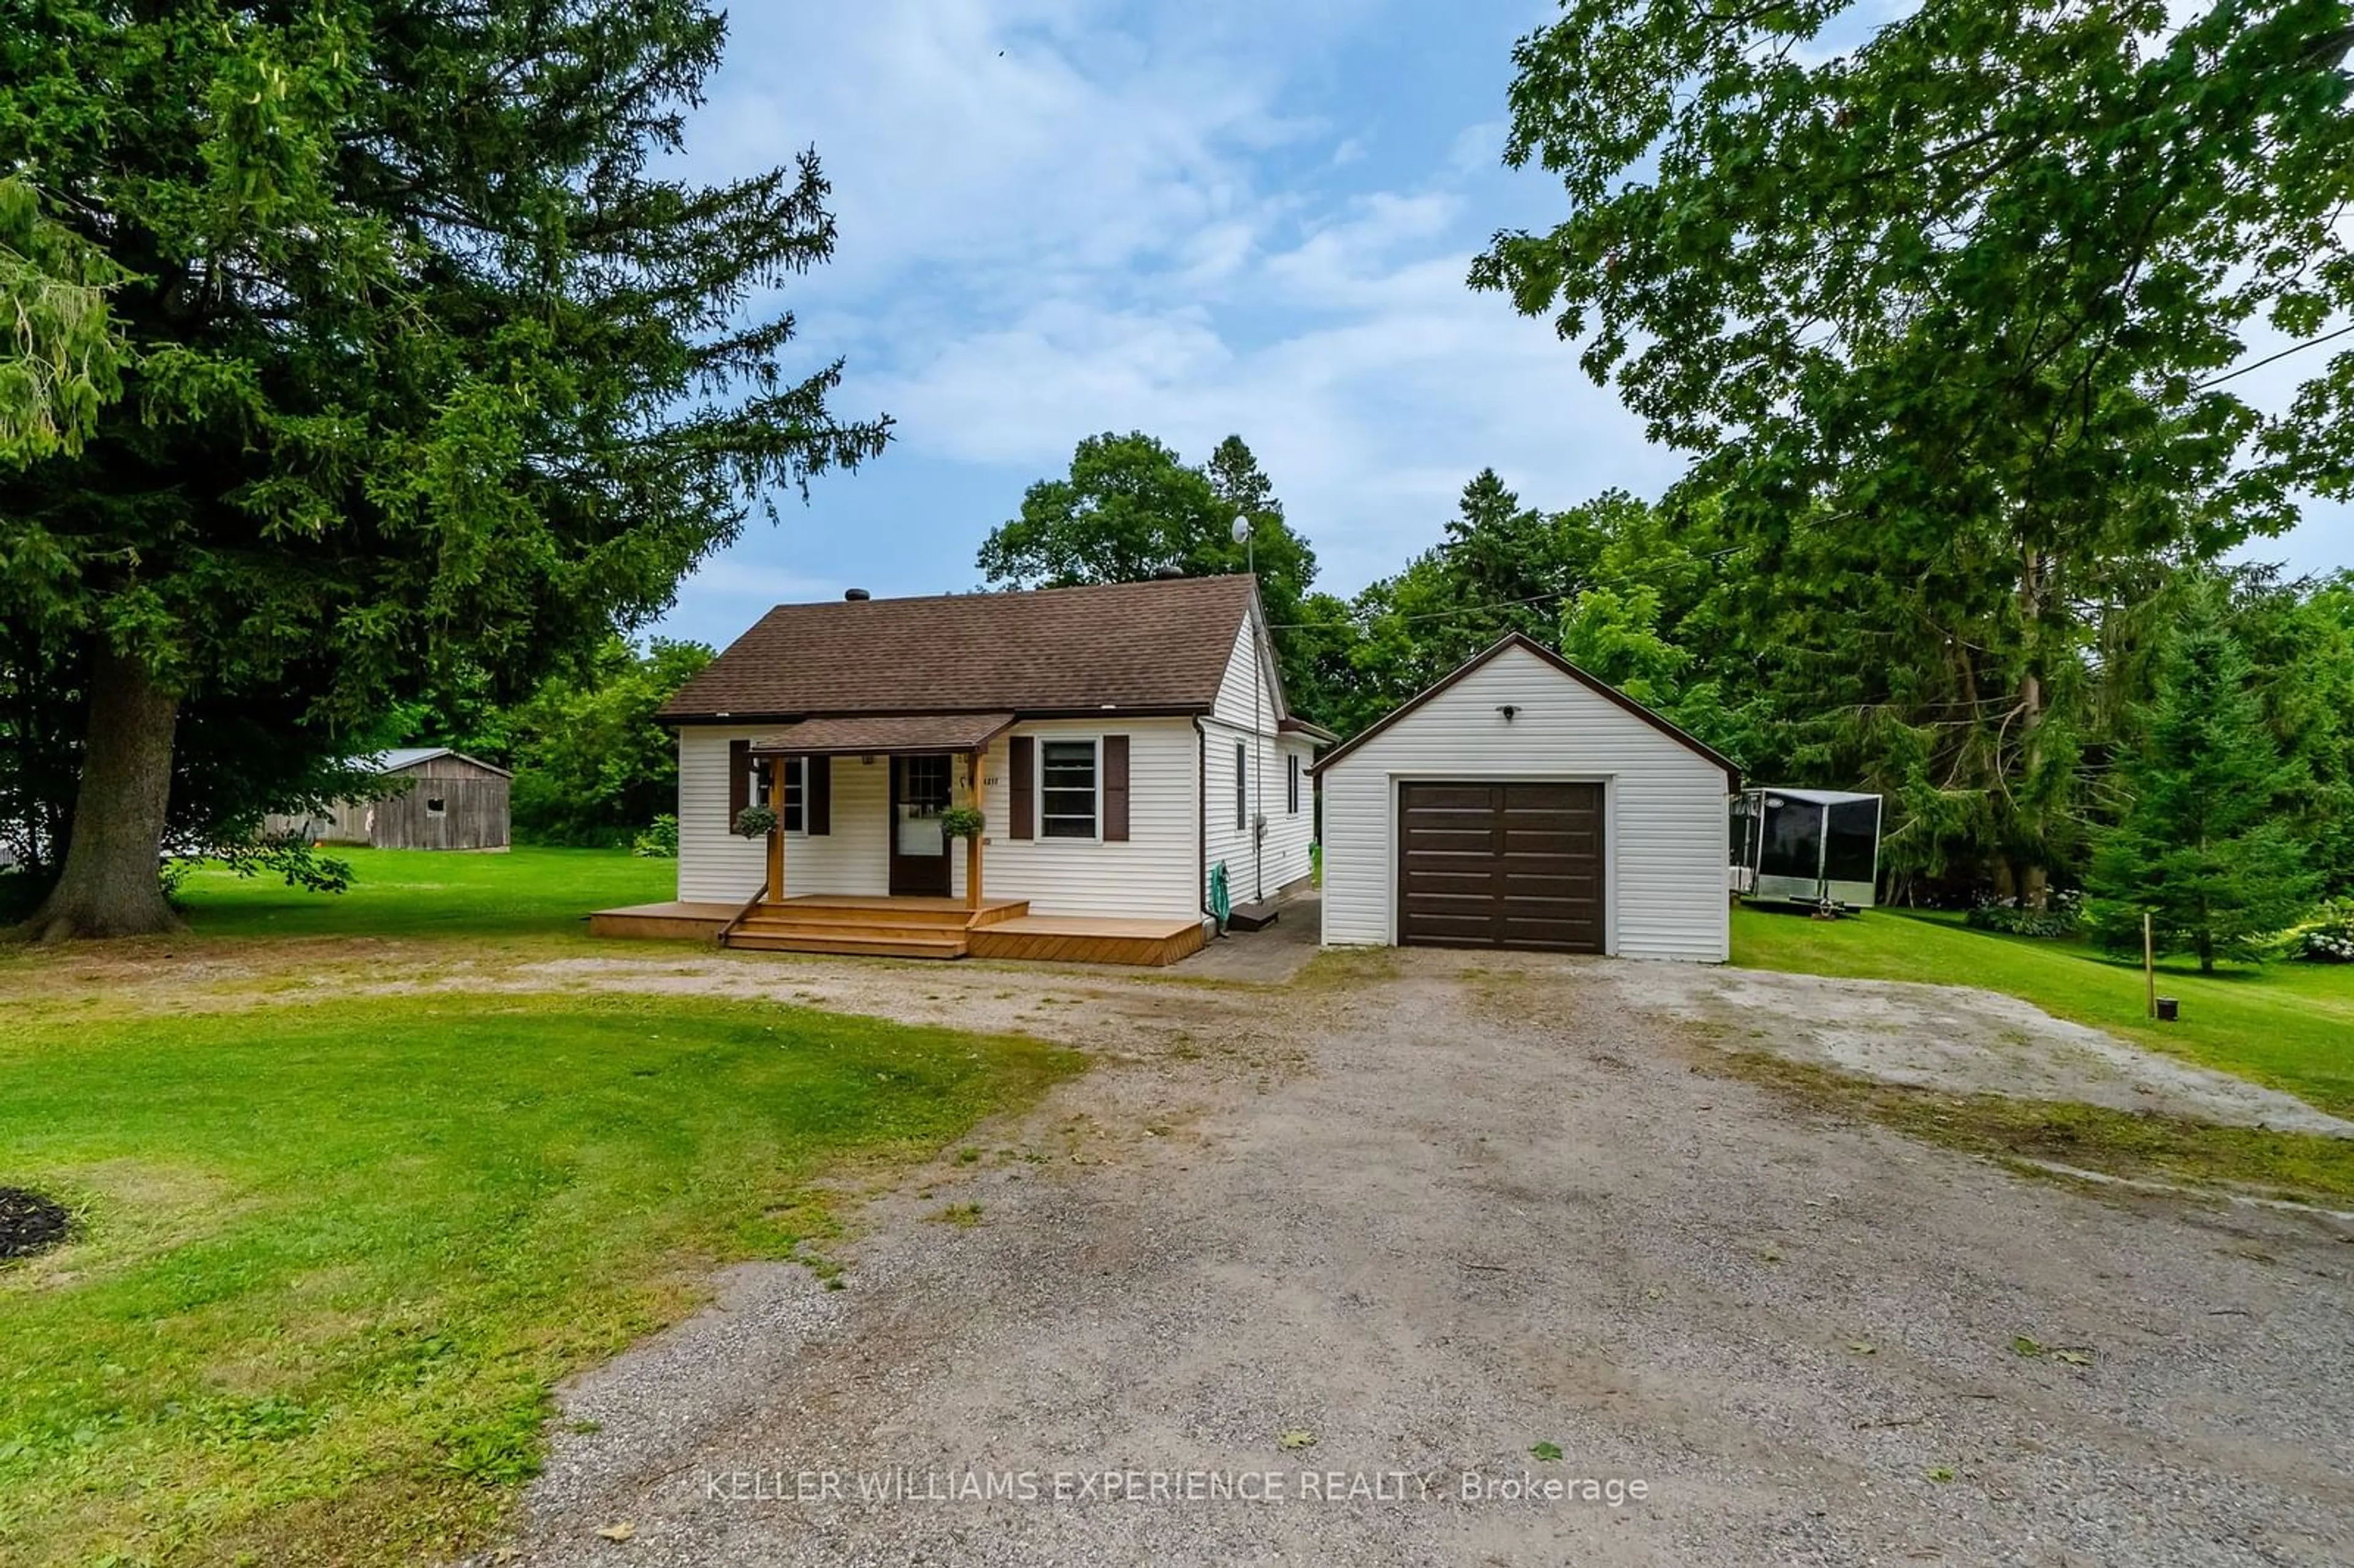 Cottage for 1217 Old Barrie Rd, Oro-Medonte Ontario L0L 2J0